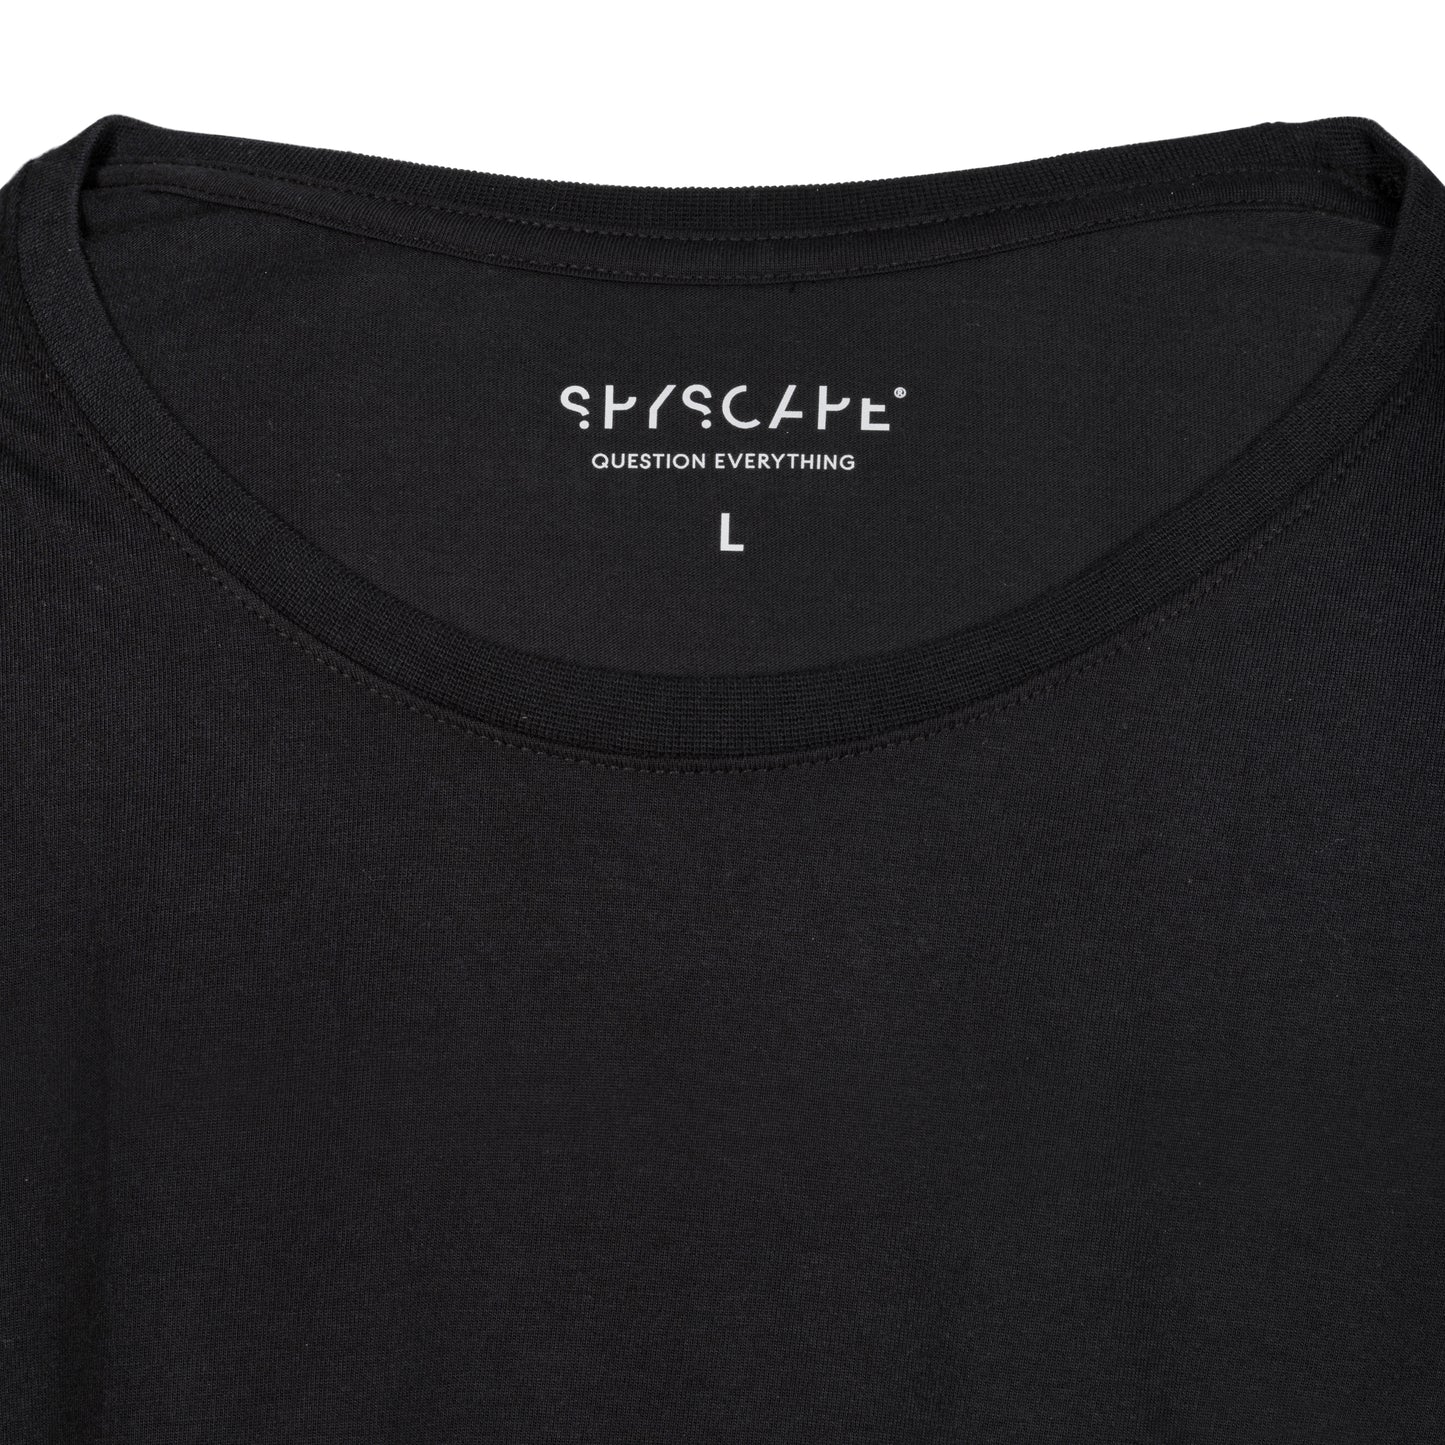 SPYSCAPE Spymaster T-shirt with Hidden Zip Pocket - Inner neck print with SPYSCAPE Question Everything and size printed